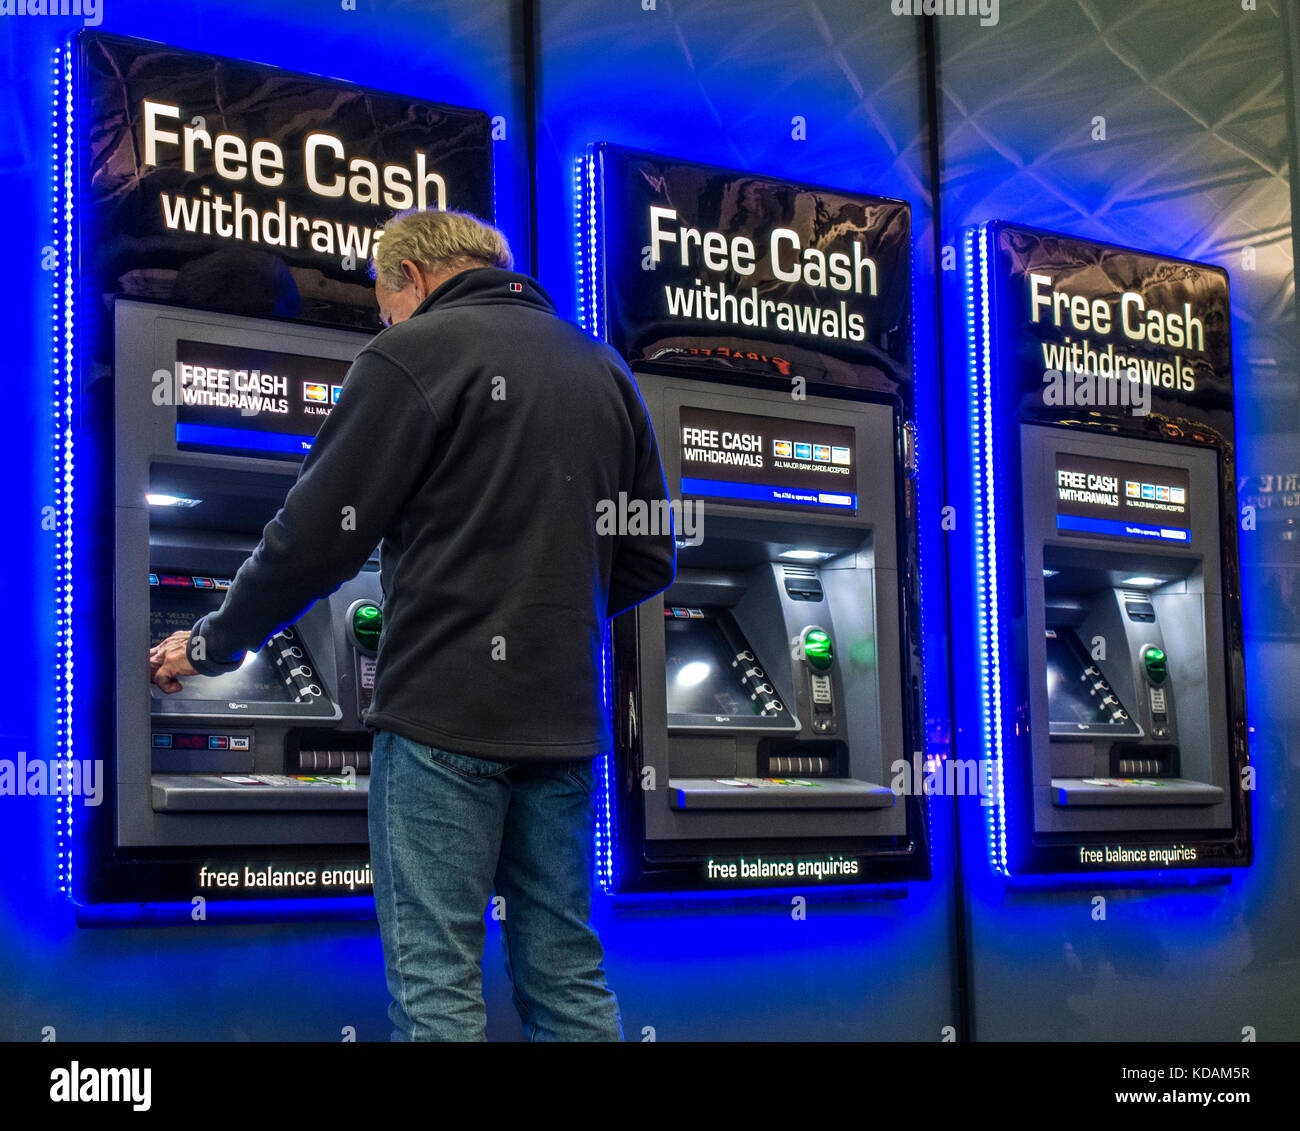 Man making cash machine / cashpoint / ATM withdrawal at a row of three machines, with glowing blue lighting. Kings Cross Station, London, England, UK. Stock Photo